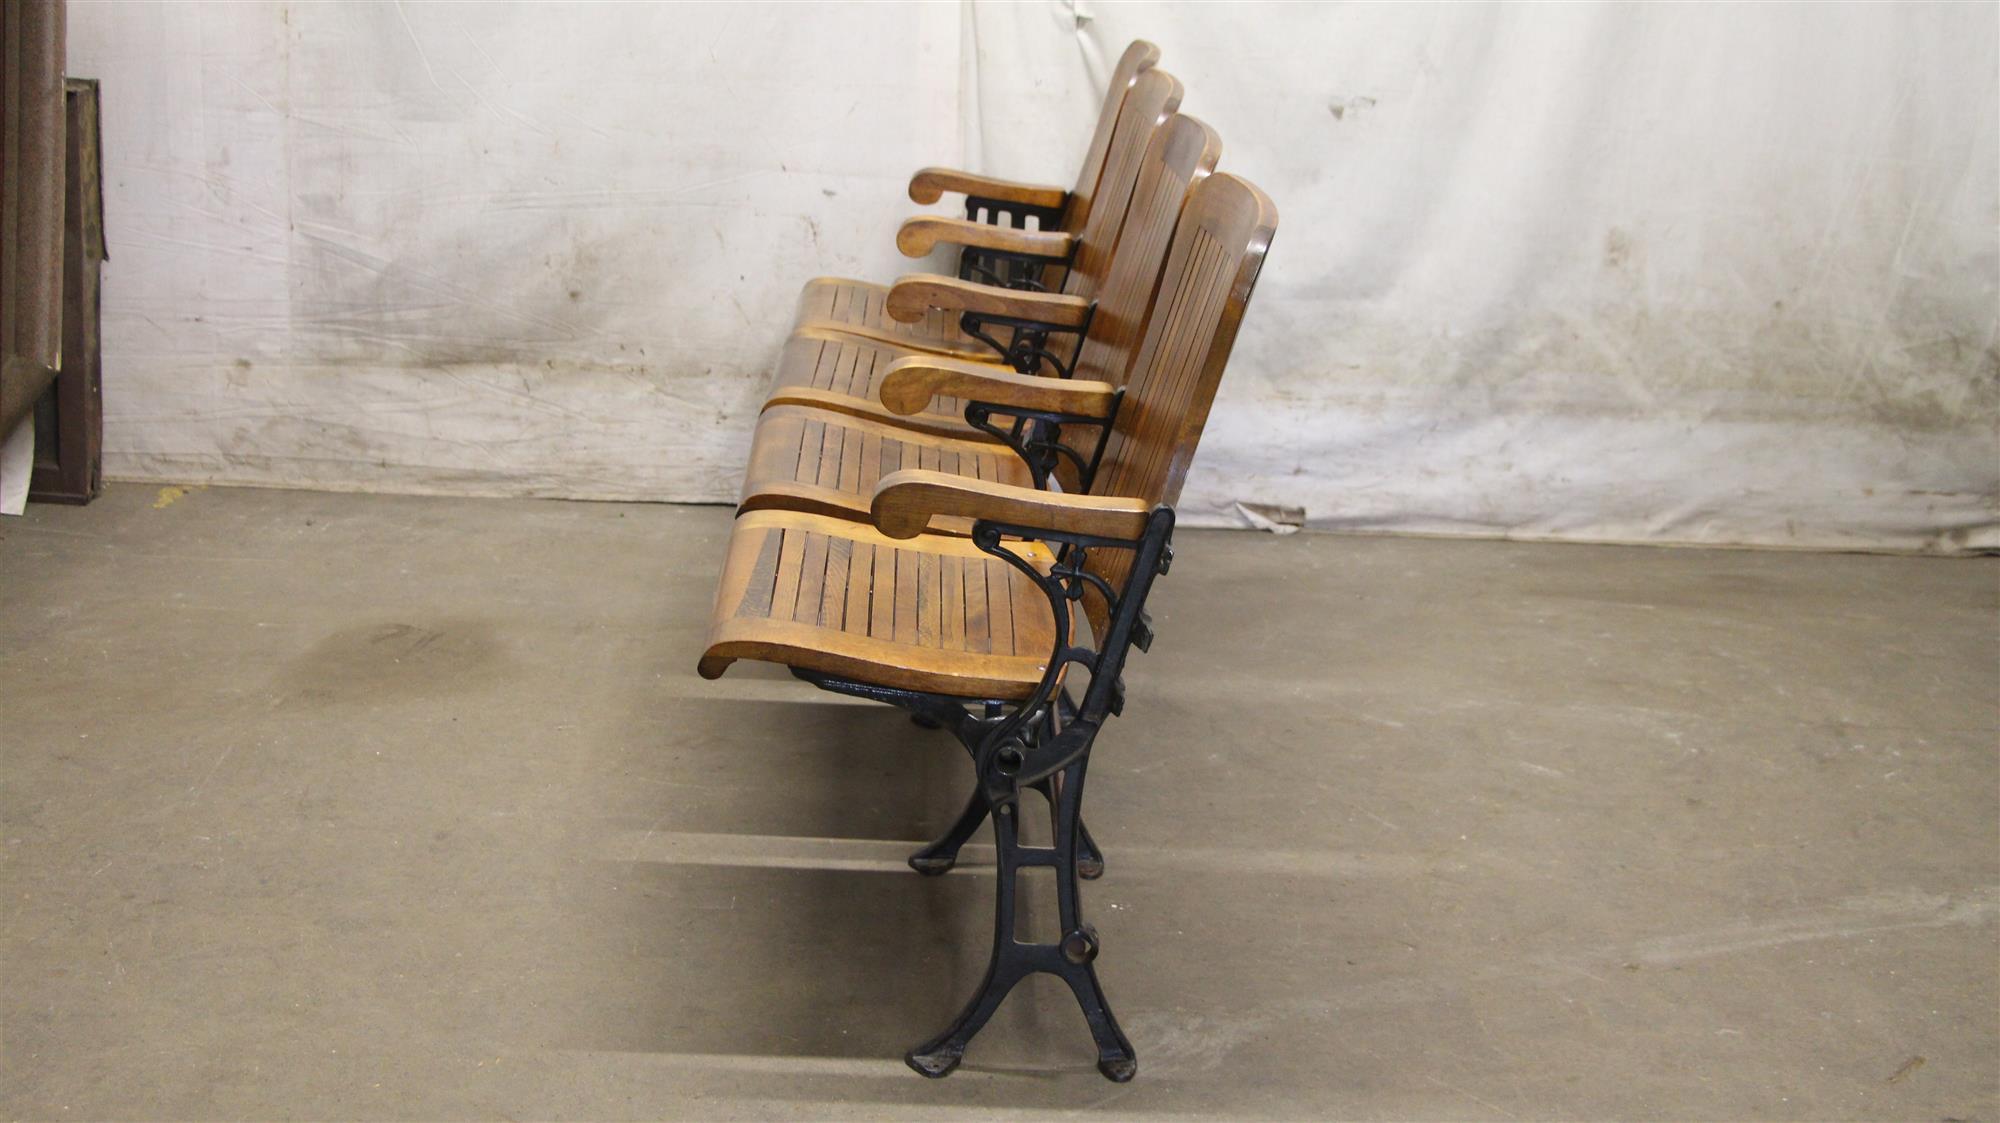 Early 20th Century 1905 Four Seat Folding Theater Chairs with Cast Iron Frame from Brooklyn